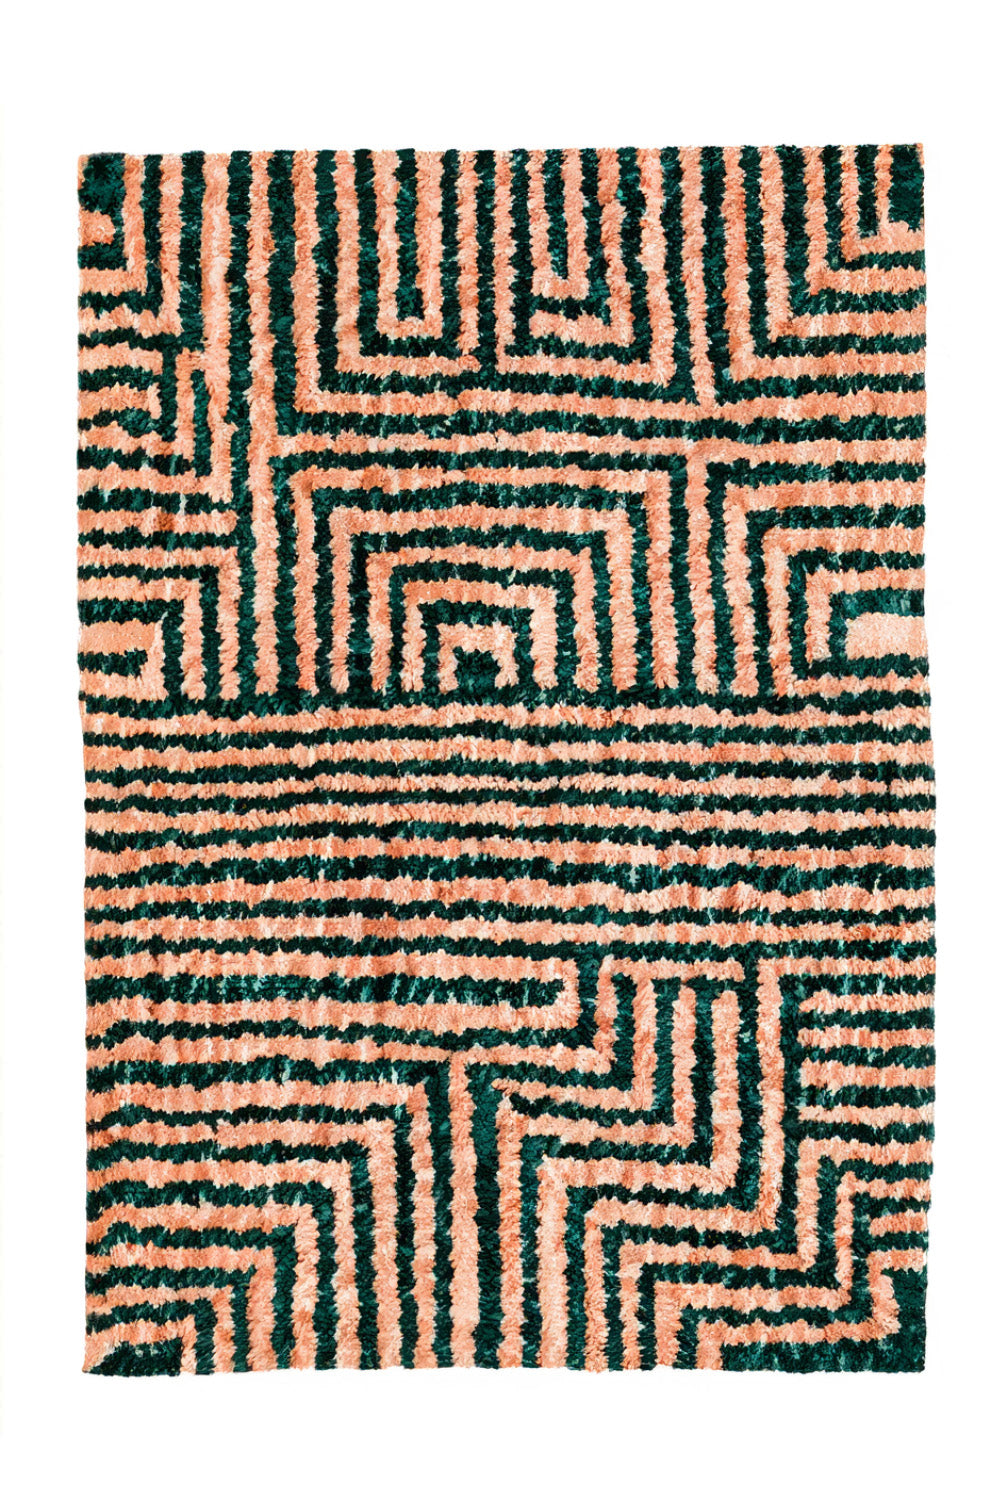 green and tan plush tufted rug with a maze design